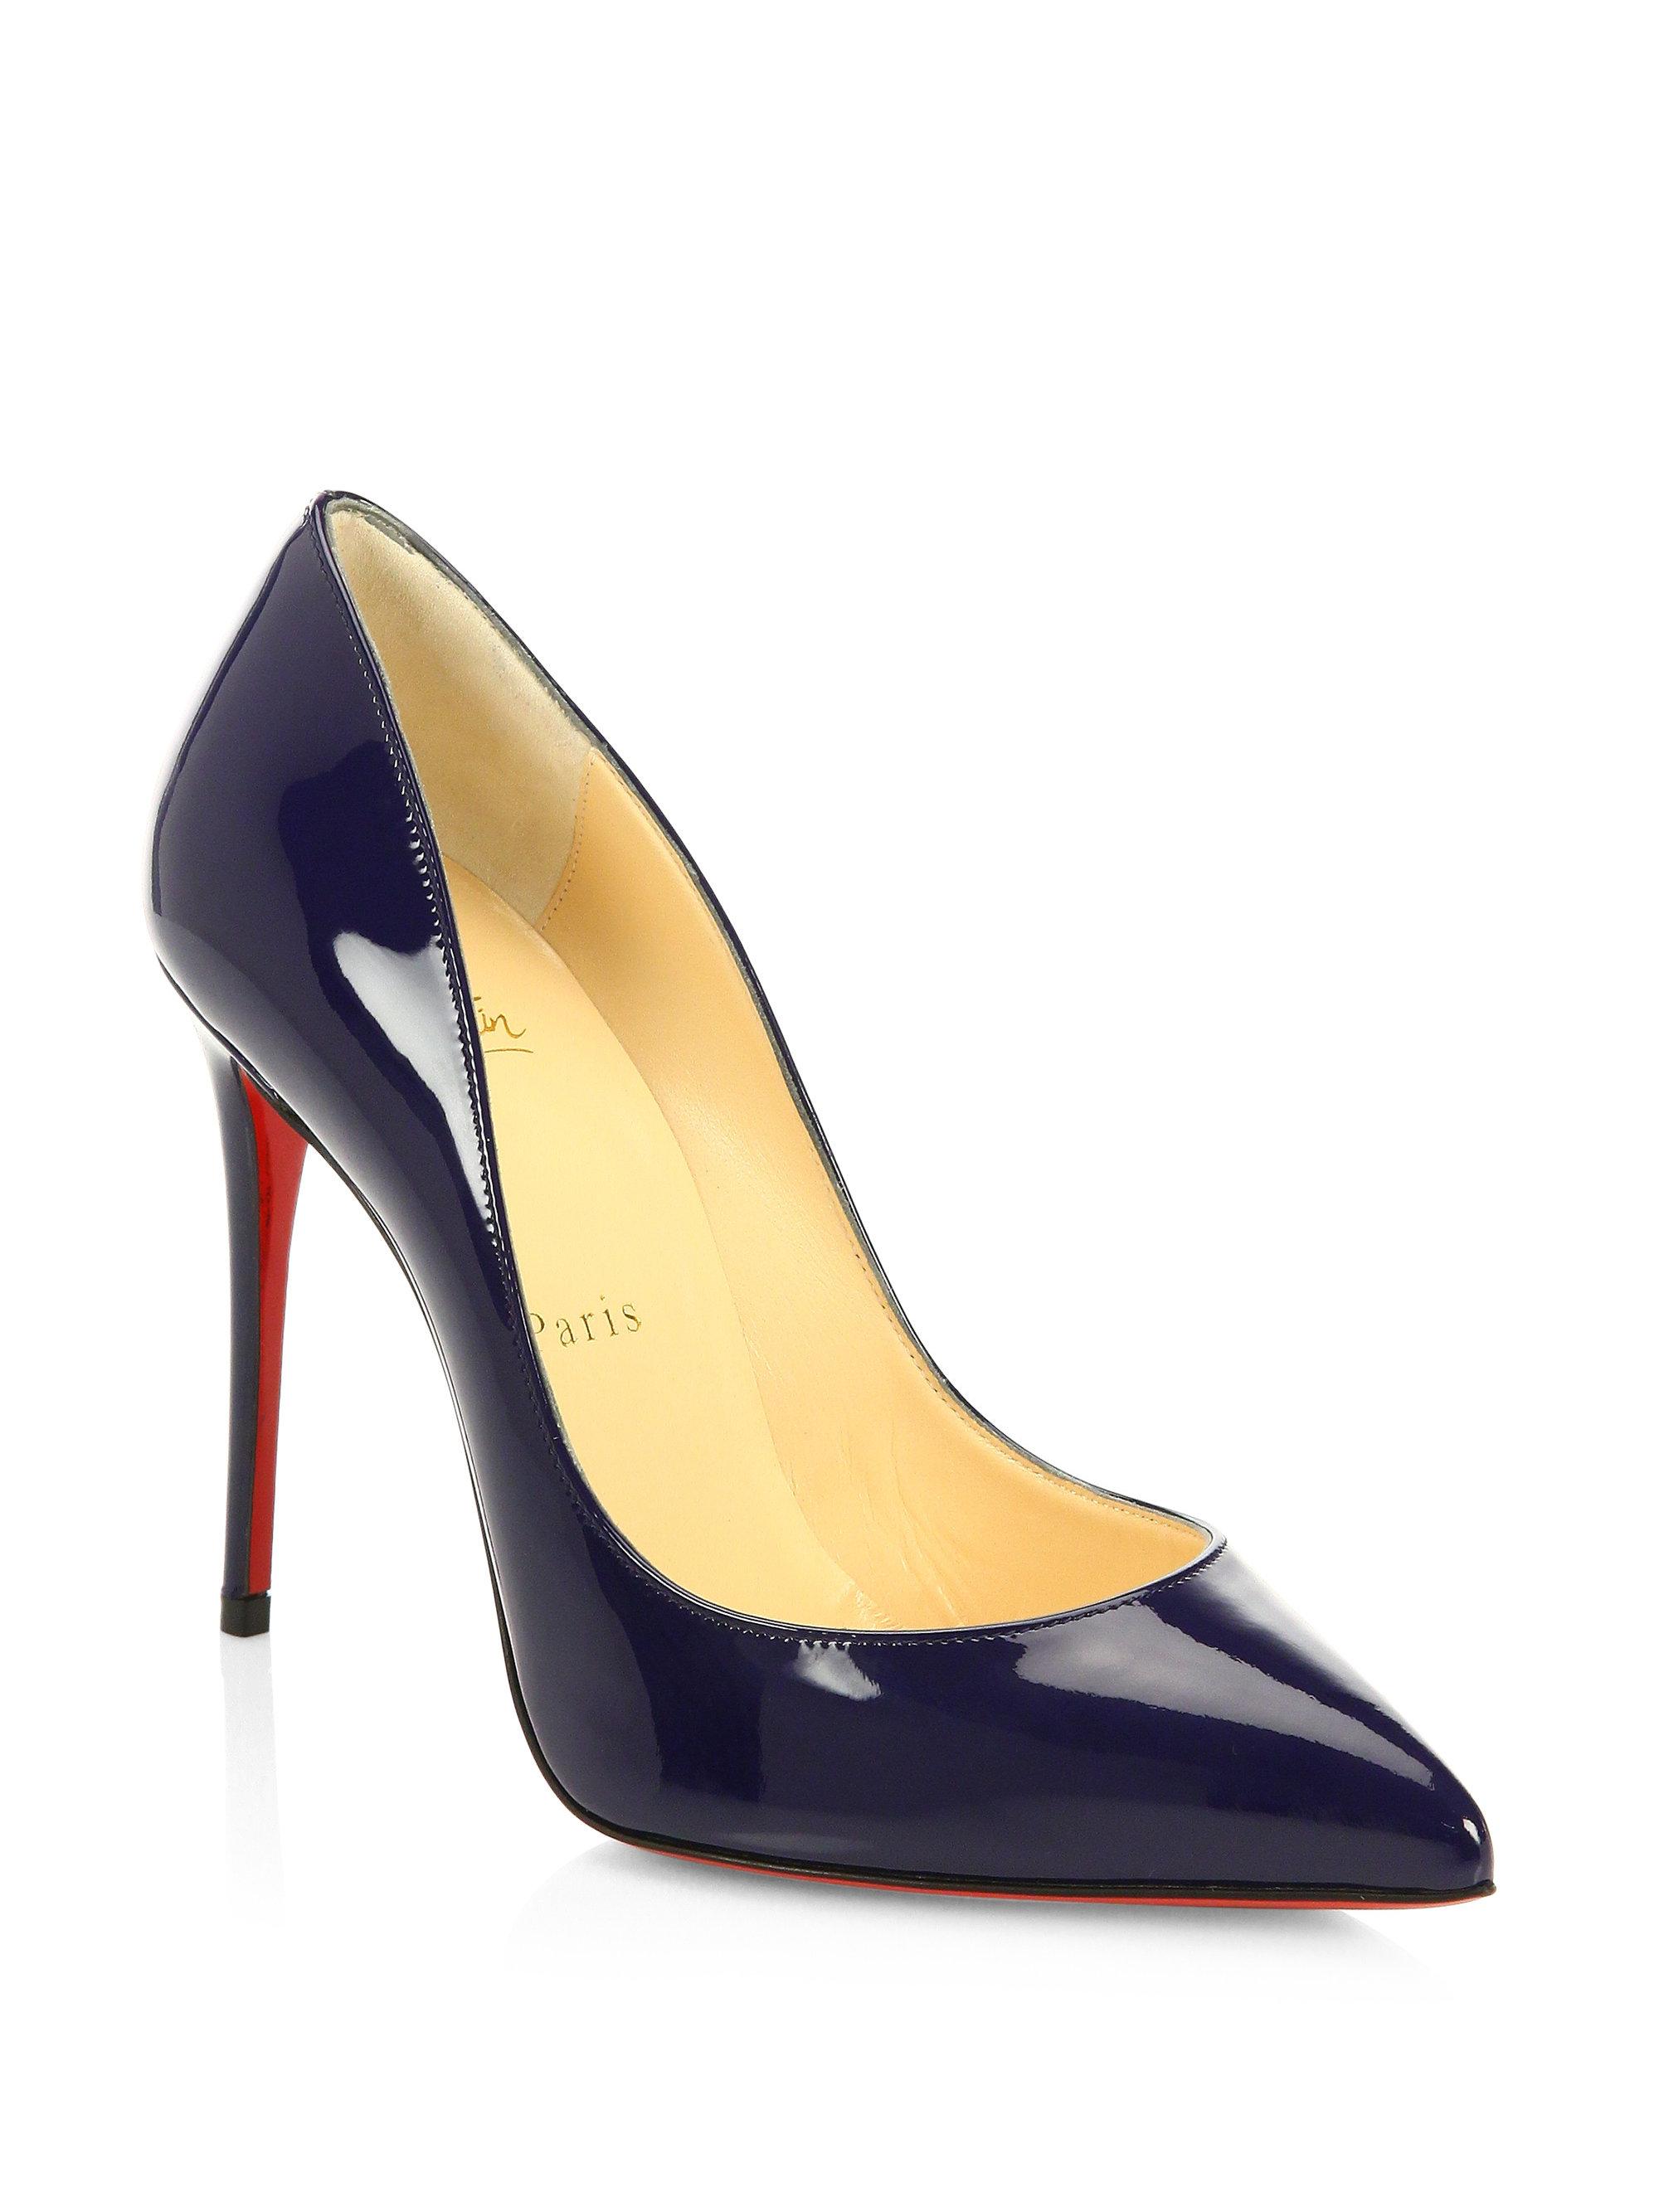 Christian Louboutin Pigalle Follies 100 Patent Leather Pumps in Blue - Lyst